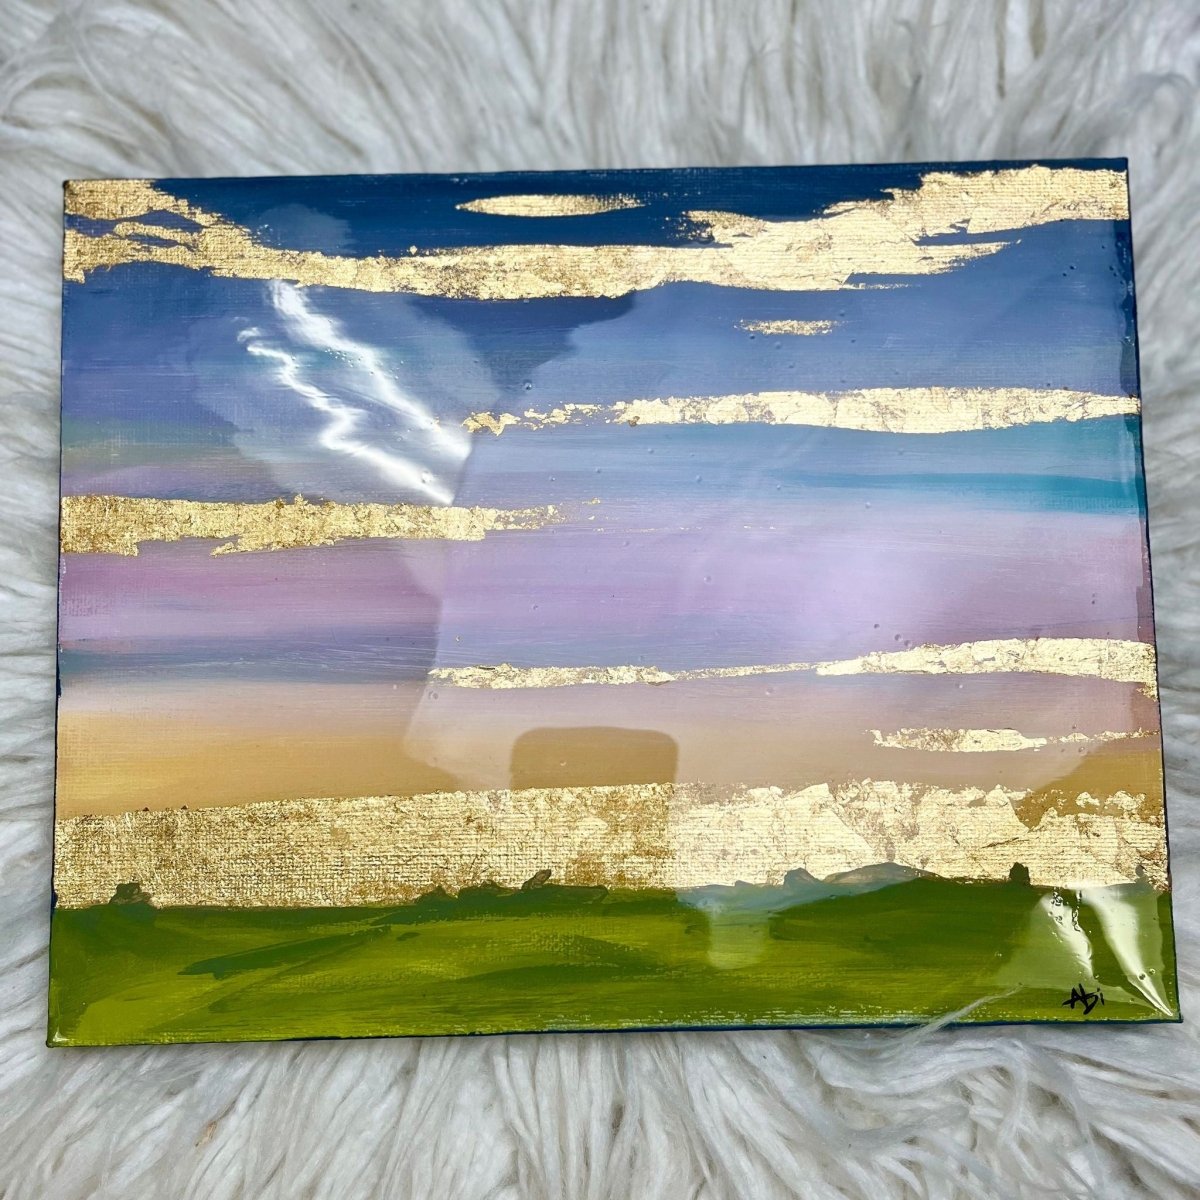 8x10 Landscape Art by Abi - Miles and Bishop